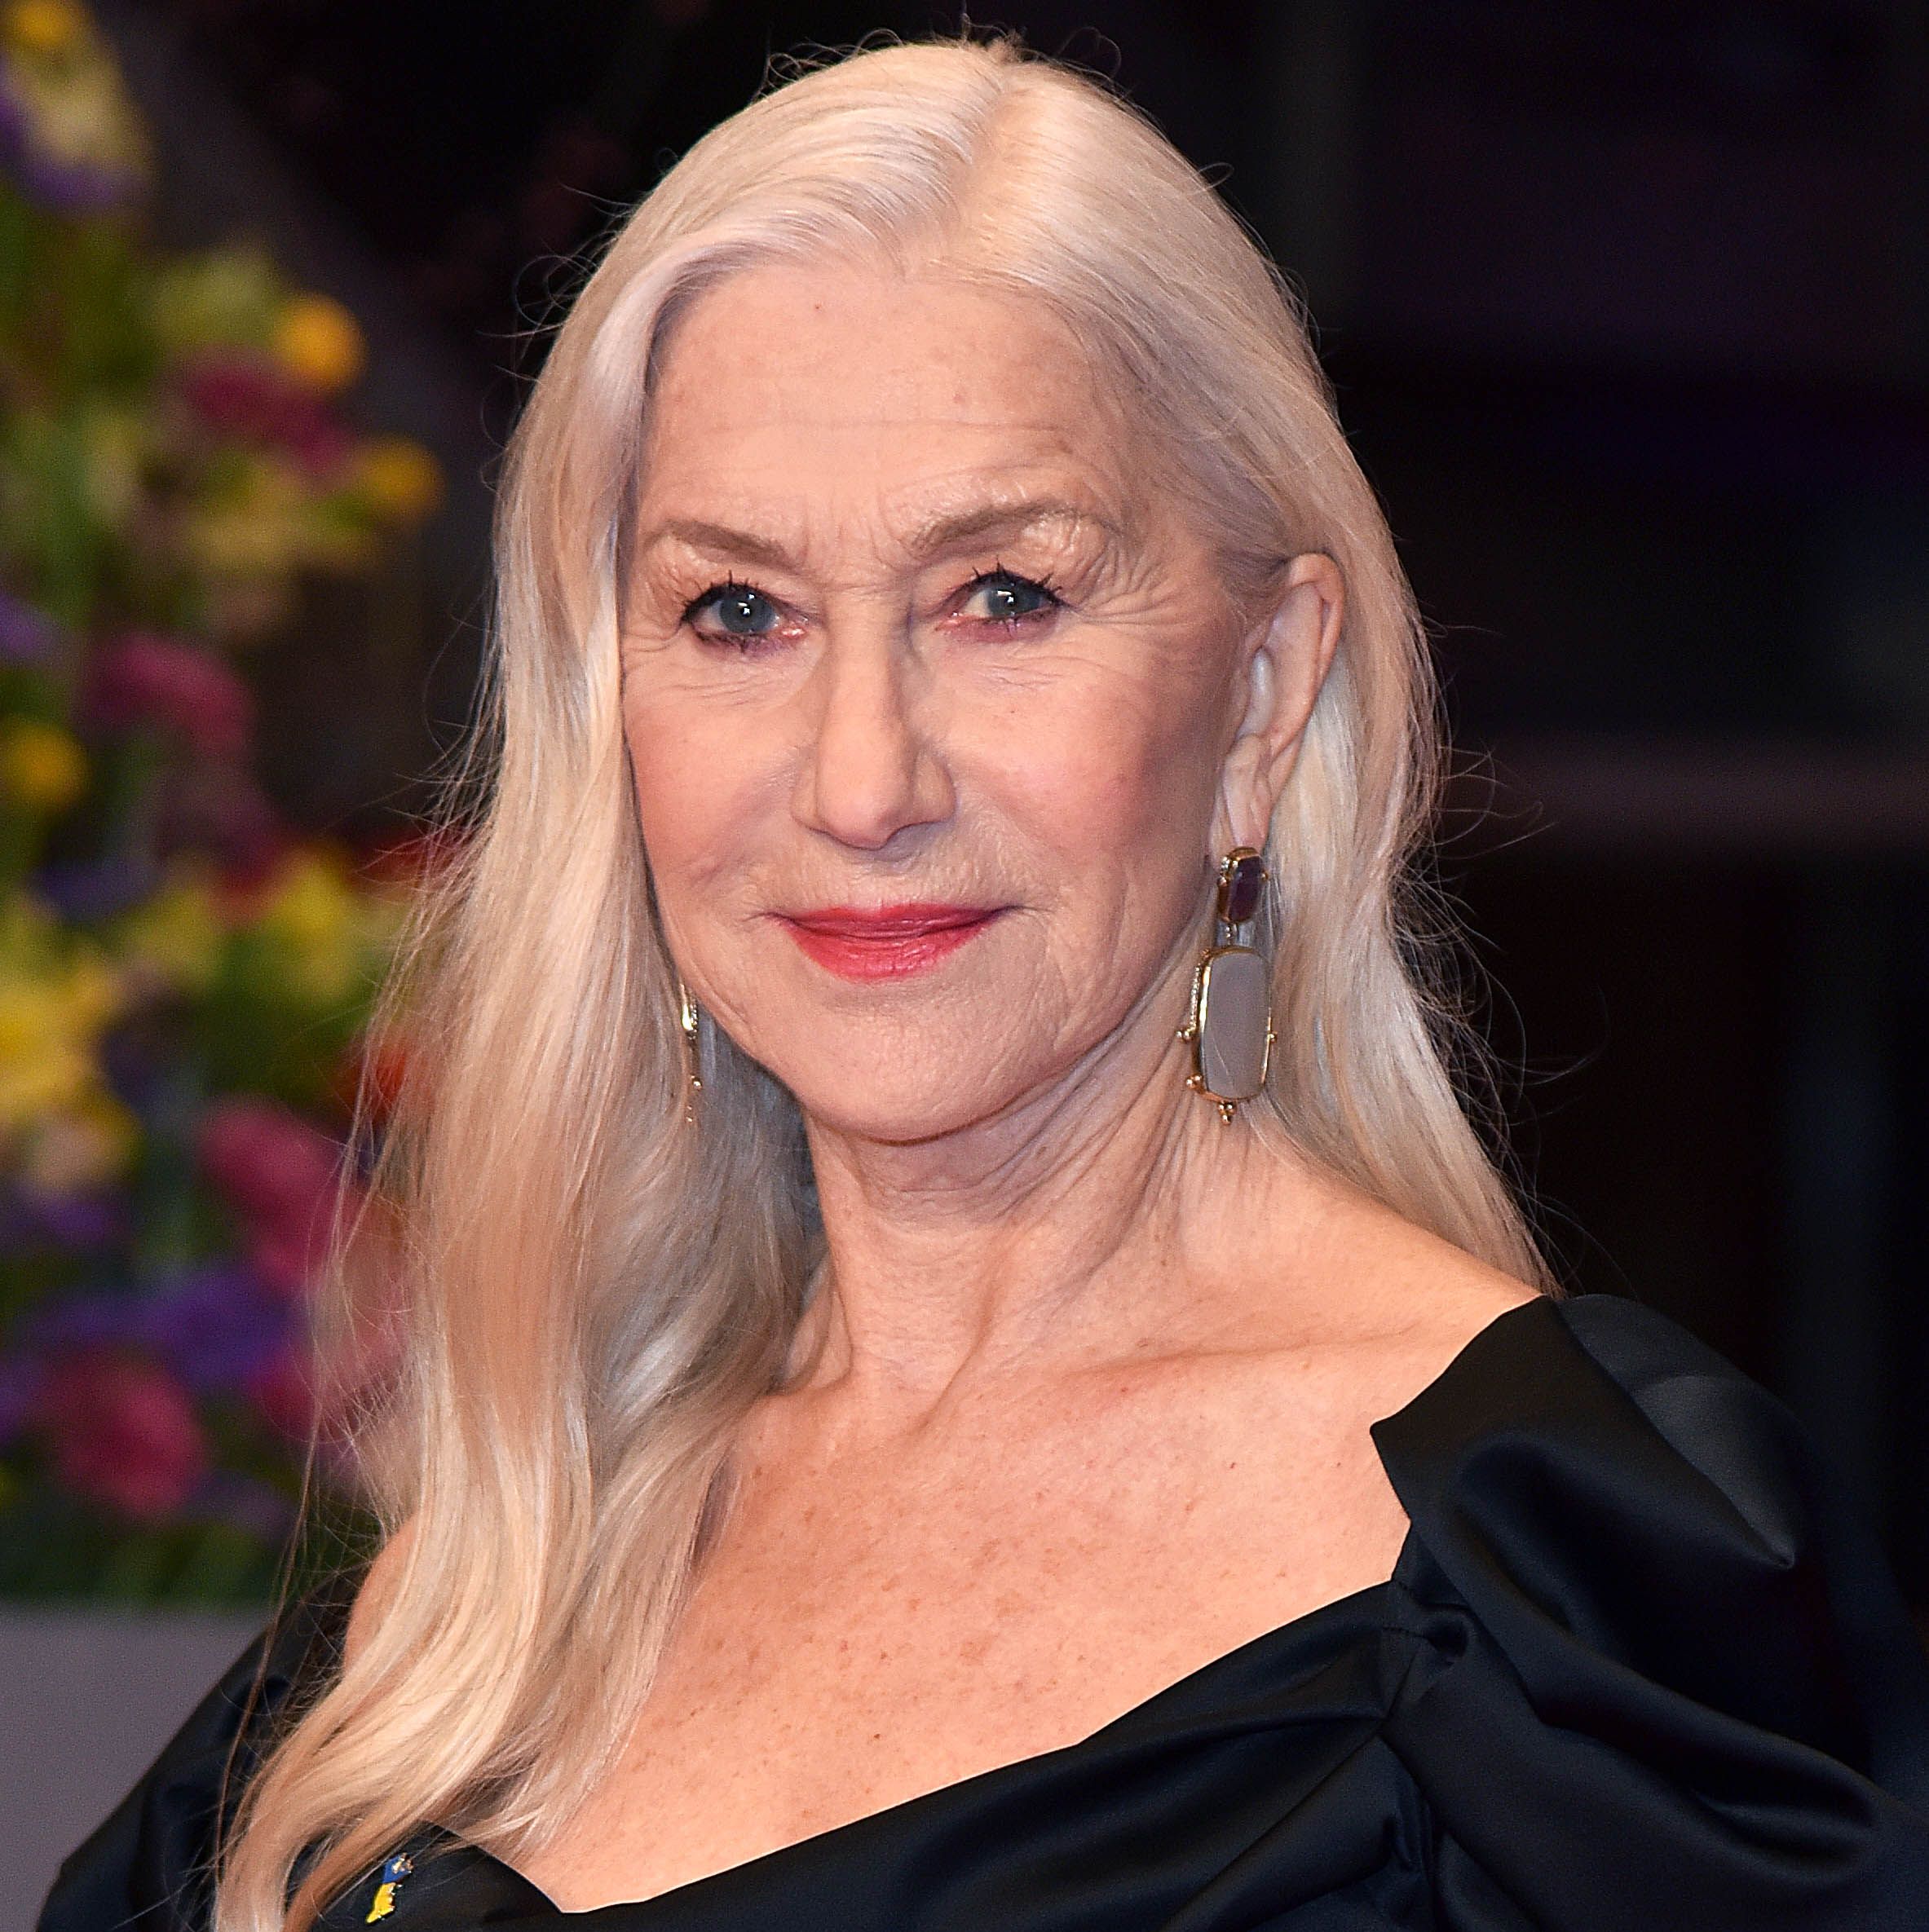 Helen Mirren Stuns in Form-Fitting Gown and Long, Gray Hair on Red Carpet